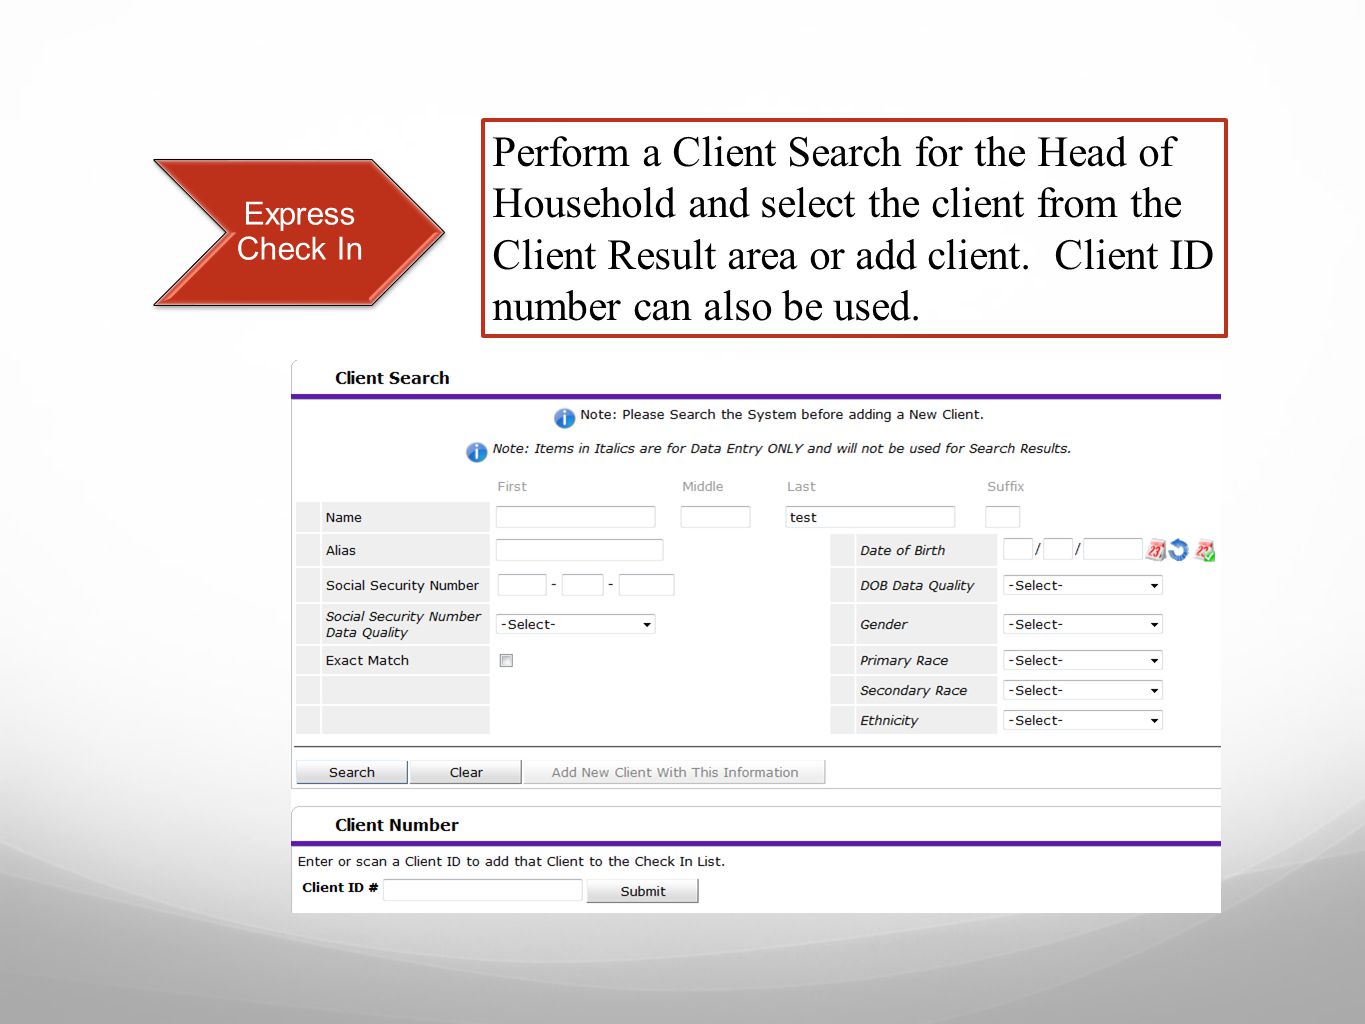 Express Check In Perform a Client Search for the Head of Household and select the client from the Client Result area or add client.